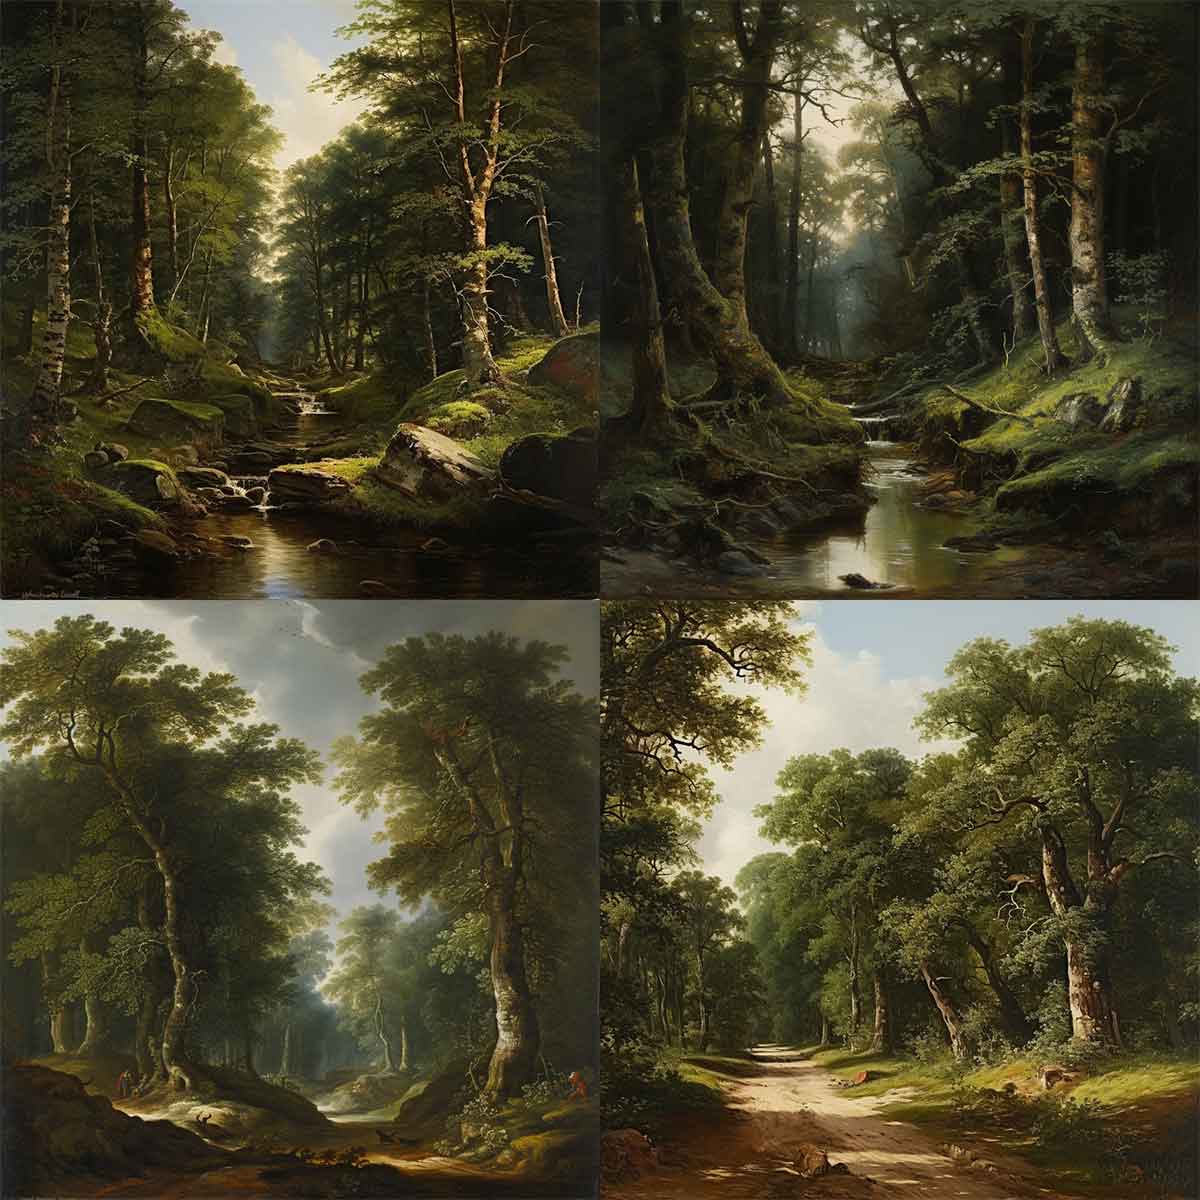 AI generated image(s) of a forest landscape.